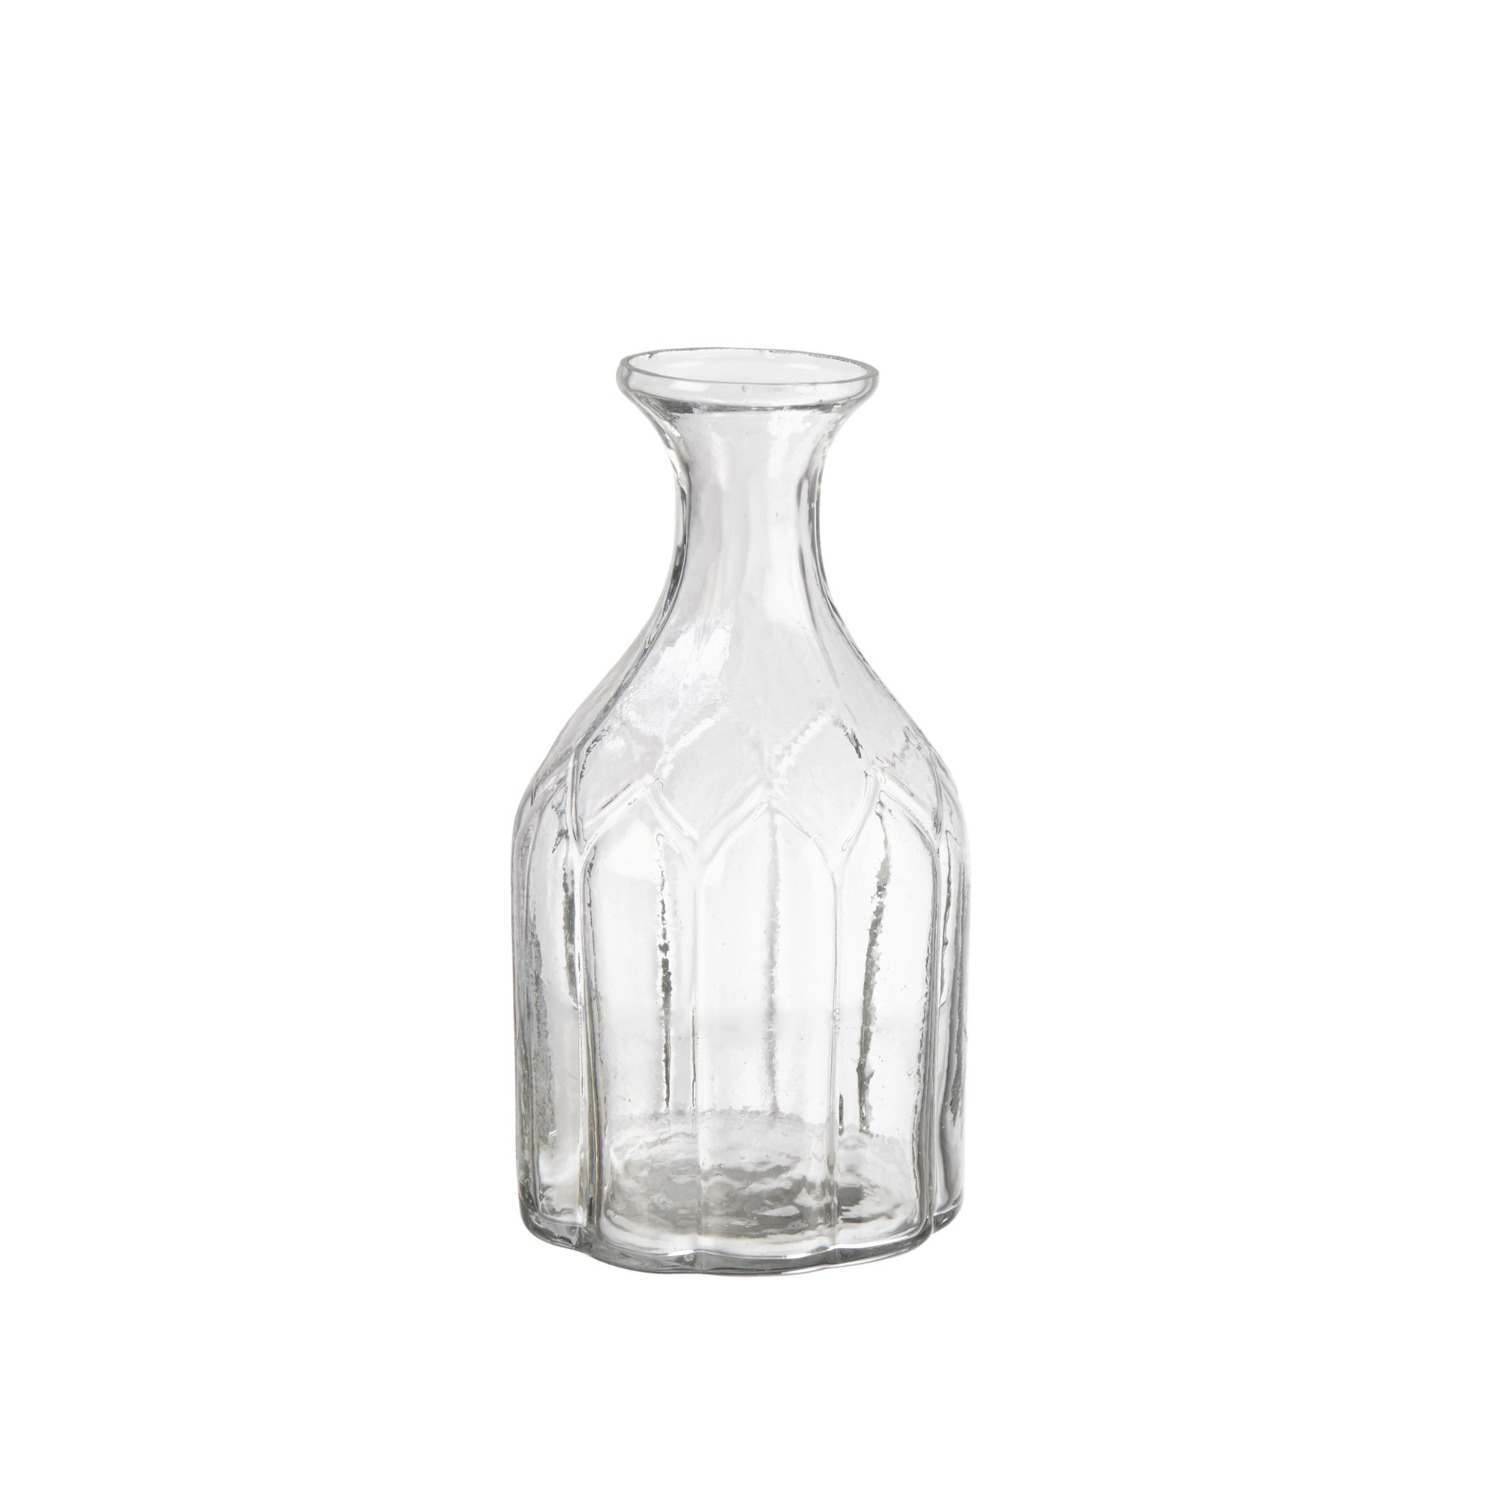 An image of Small Romance Vase